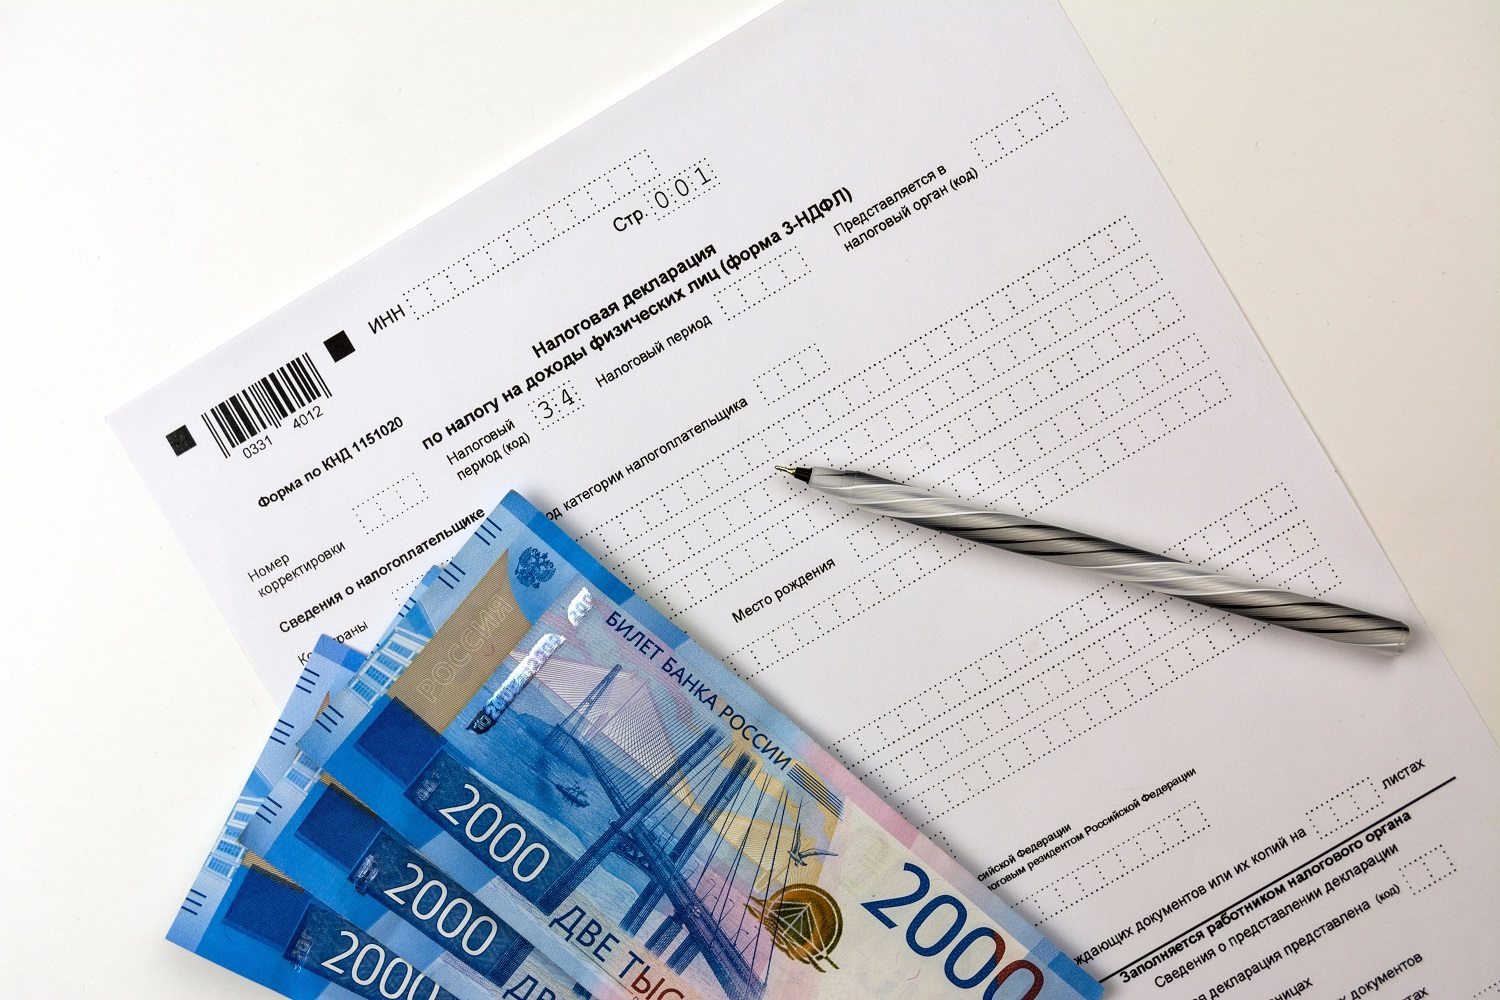 A blank copy of the Russian tax declaration form, ruble banknotes, and a pen all rest on a table.